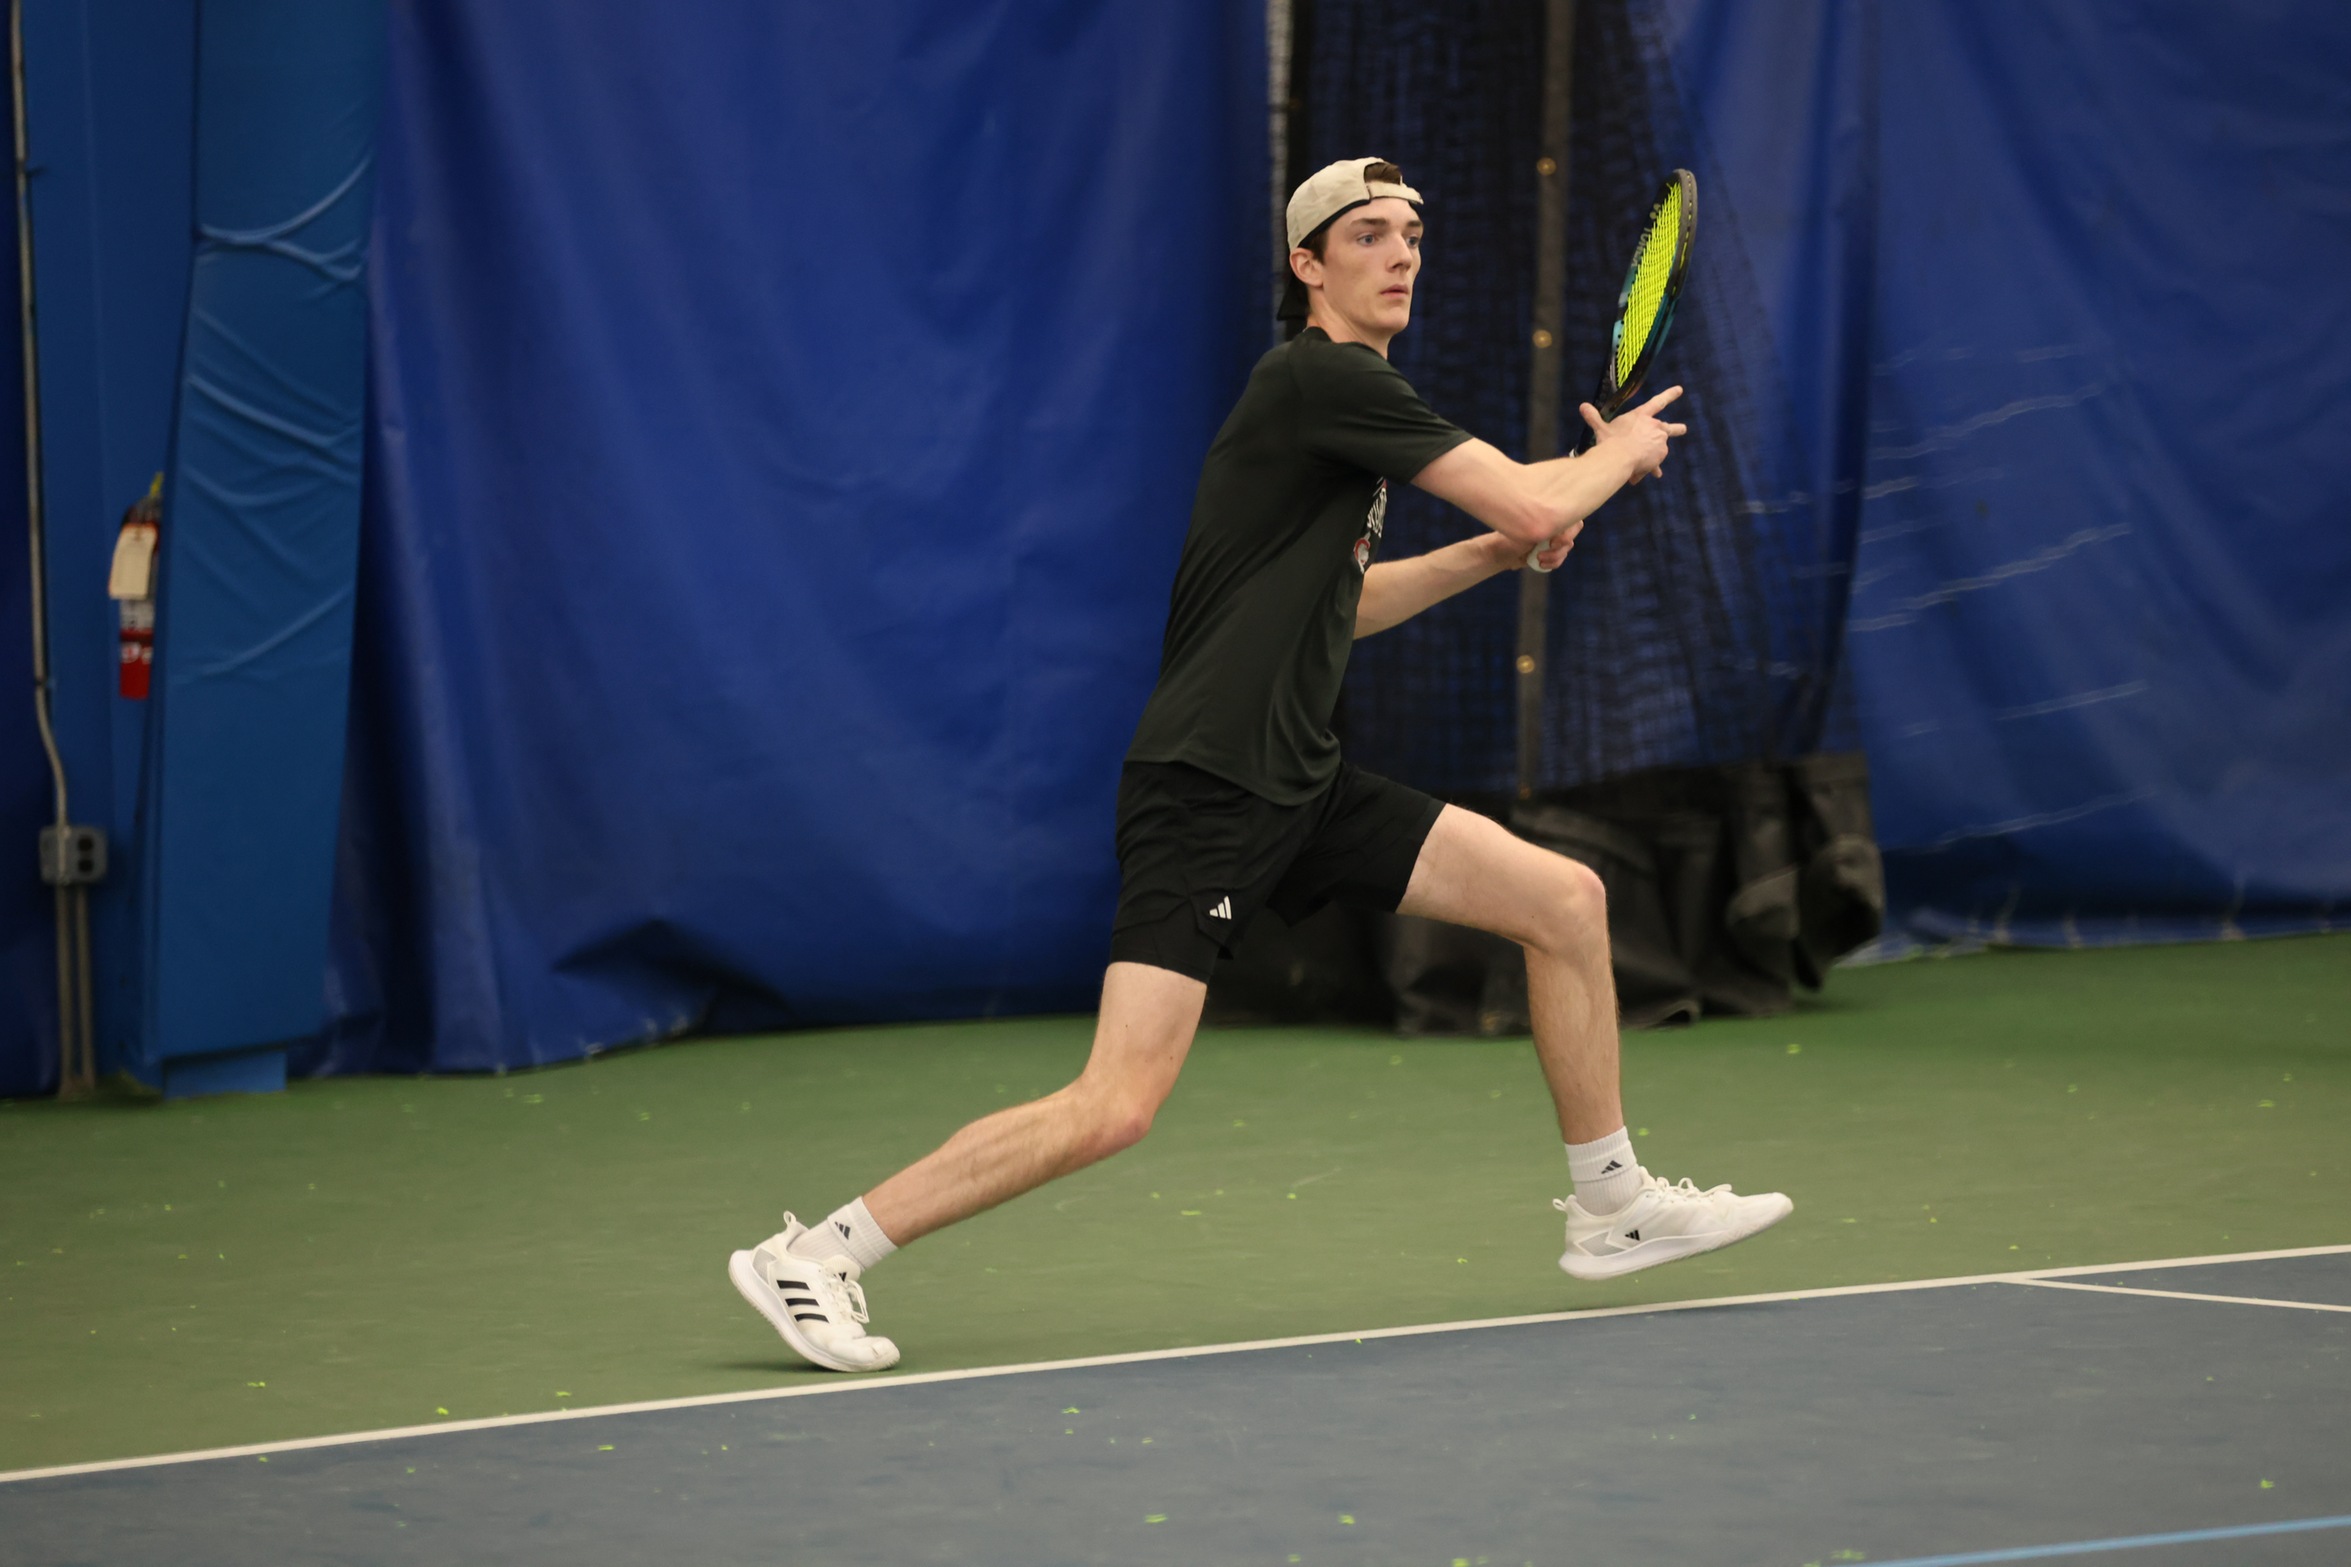 Men's Tennis drops matches to Lawrence Tech and Saint Francis (IN)